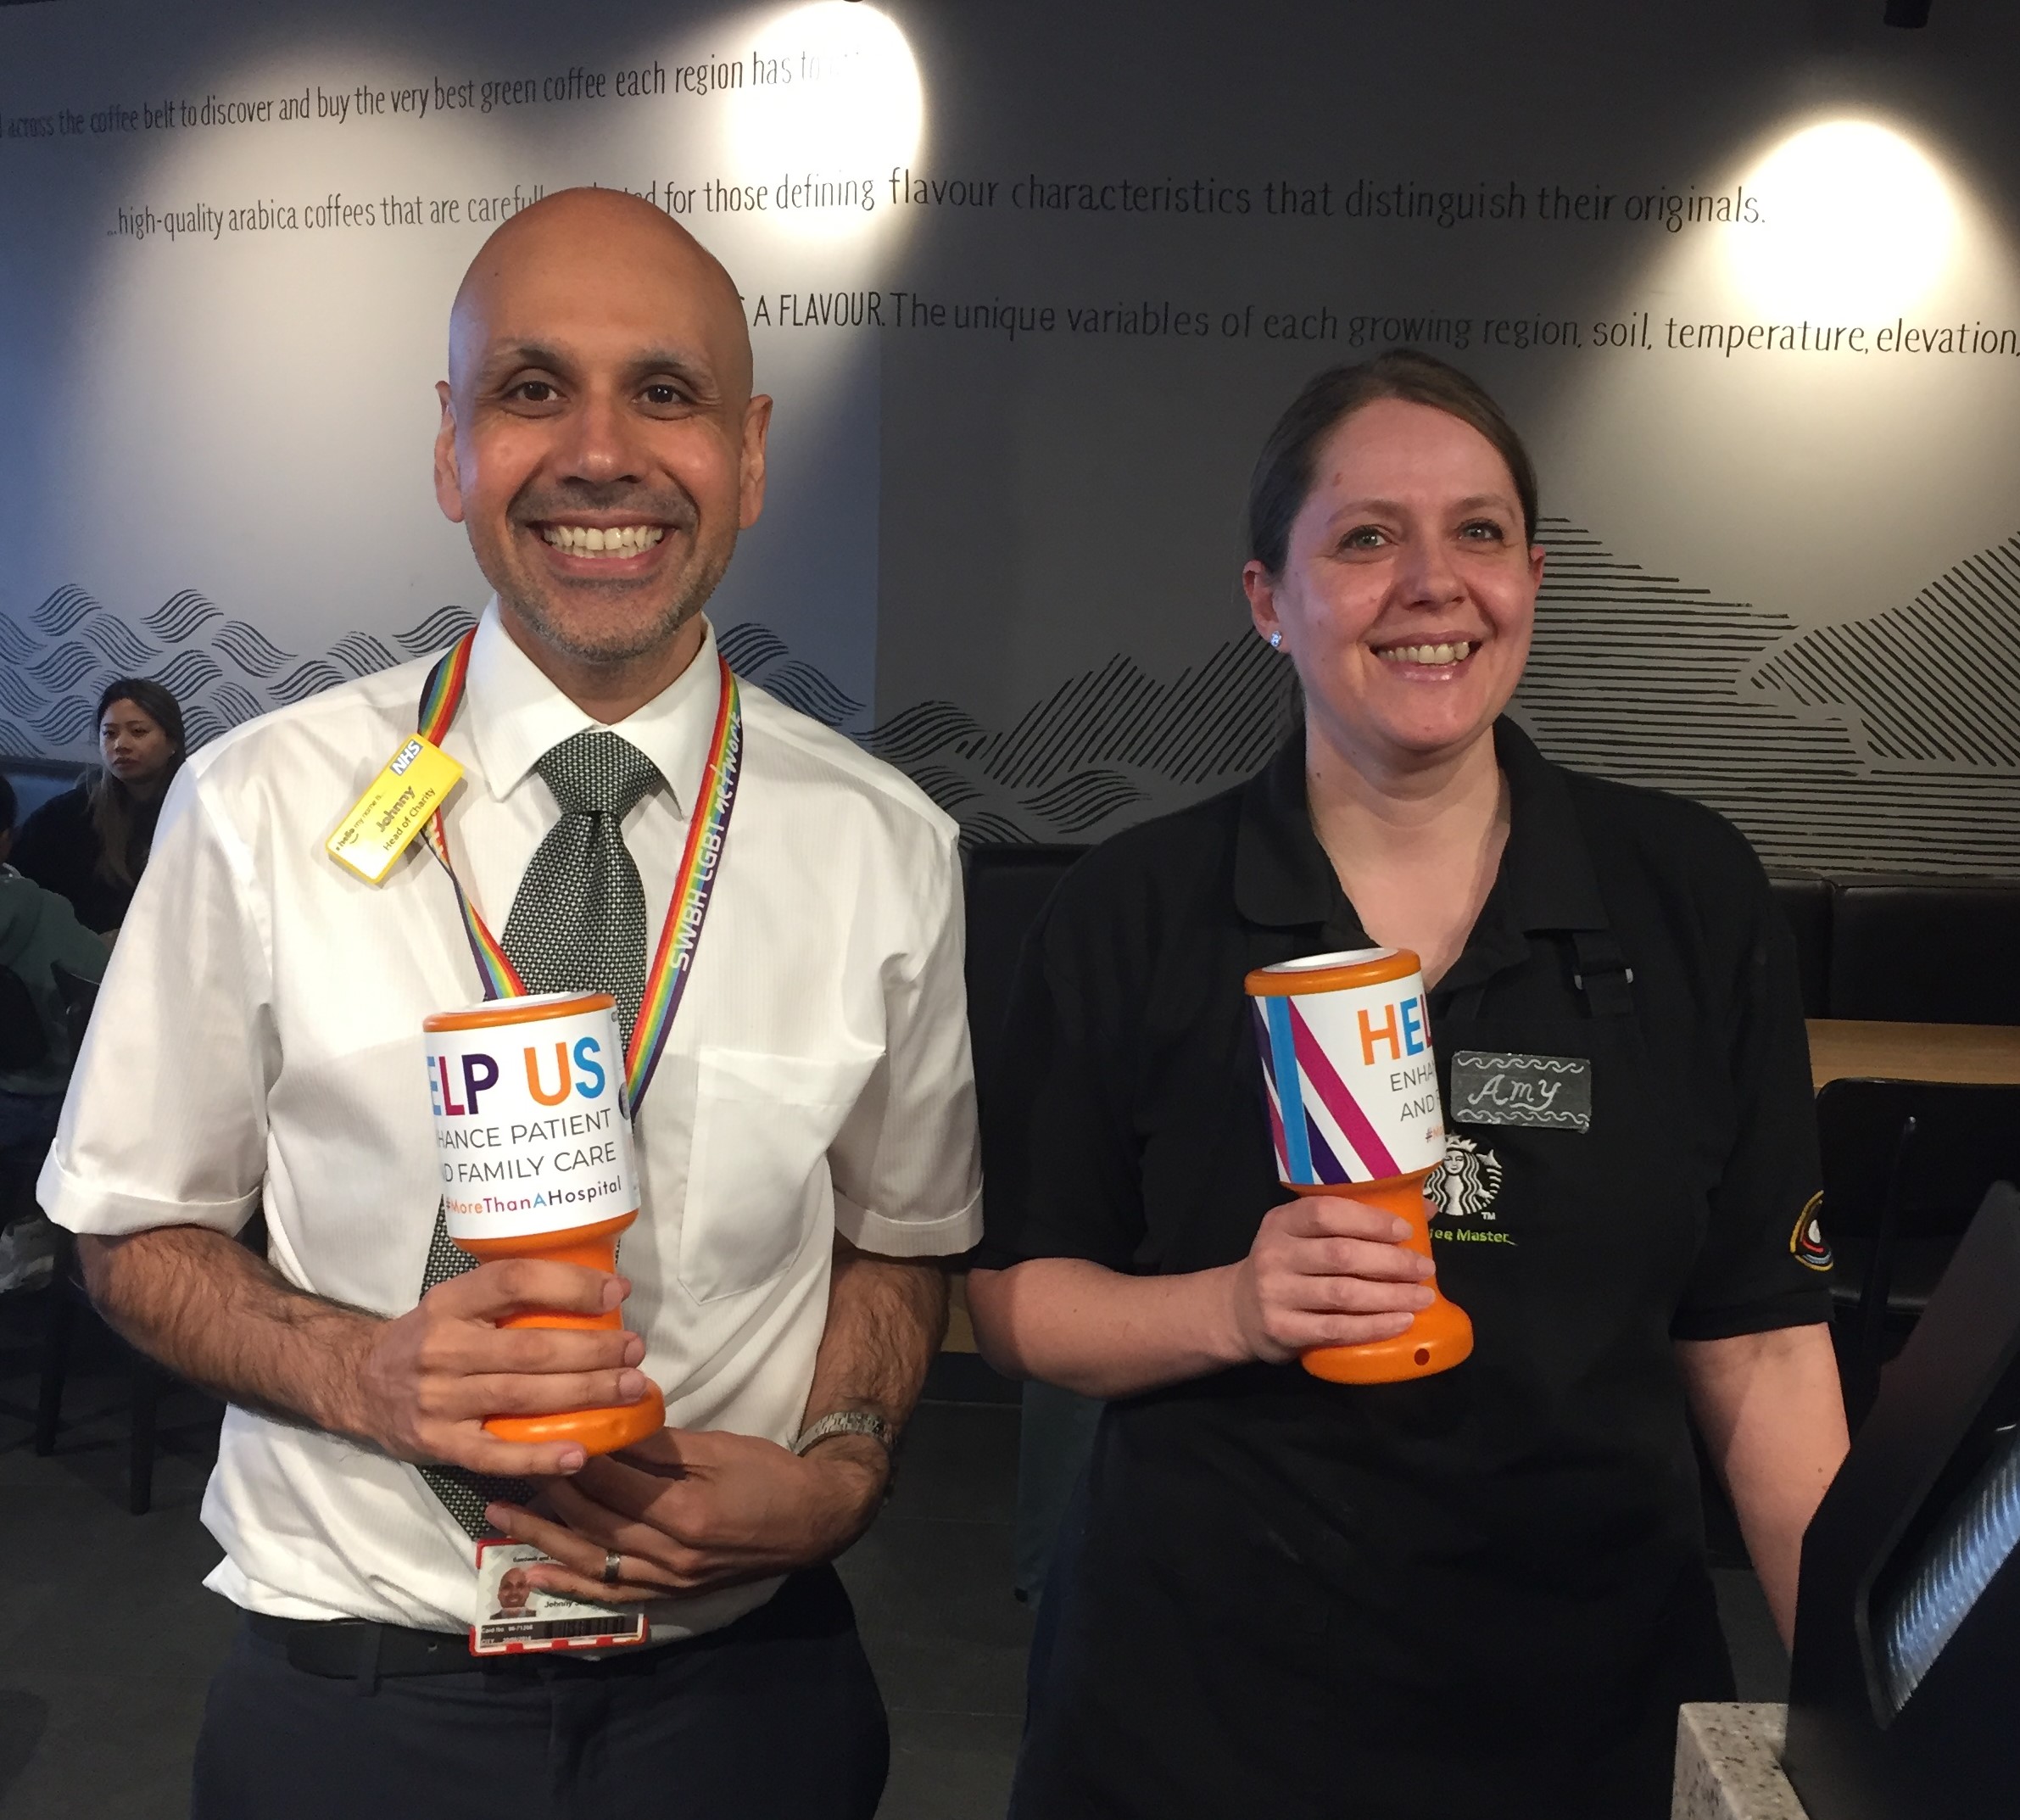 Johnny Shah, Head of Your trust charity with Amy Dutty, Starbucks Manager